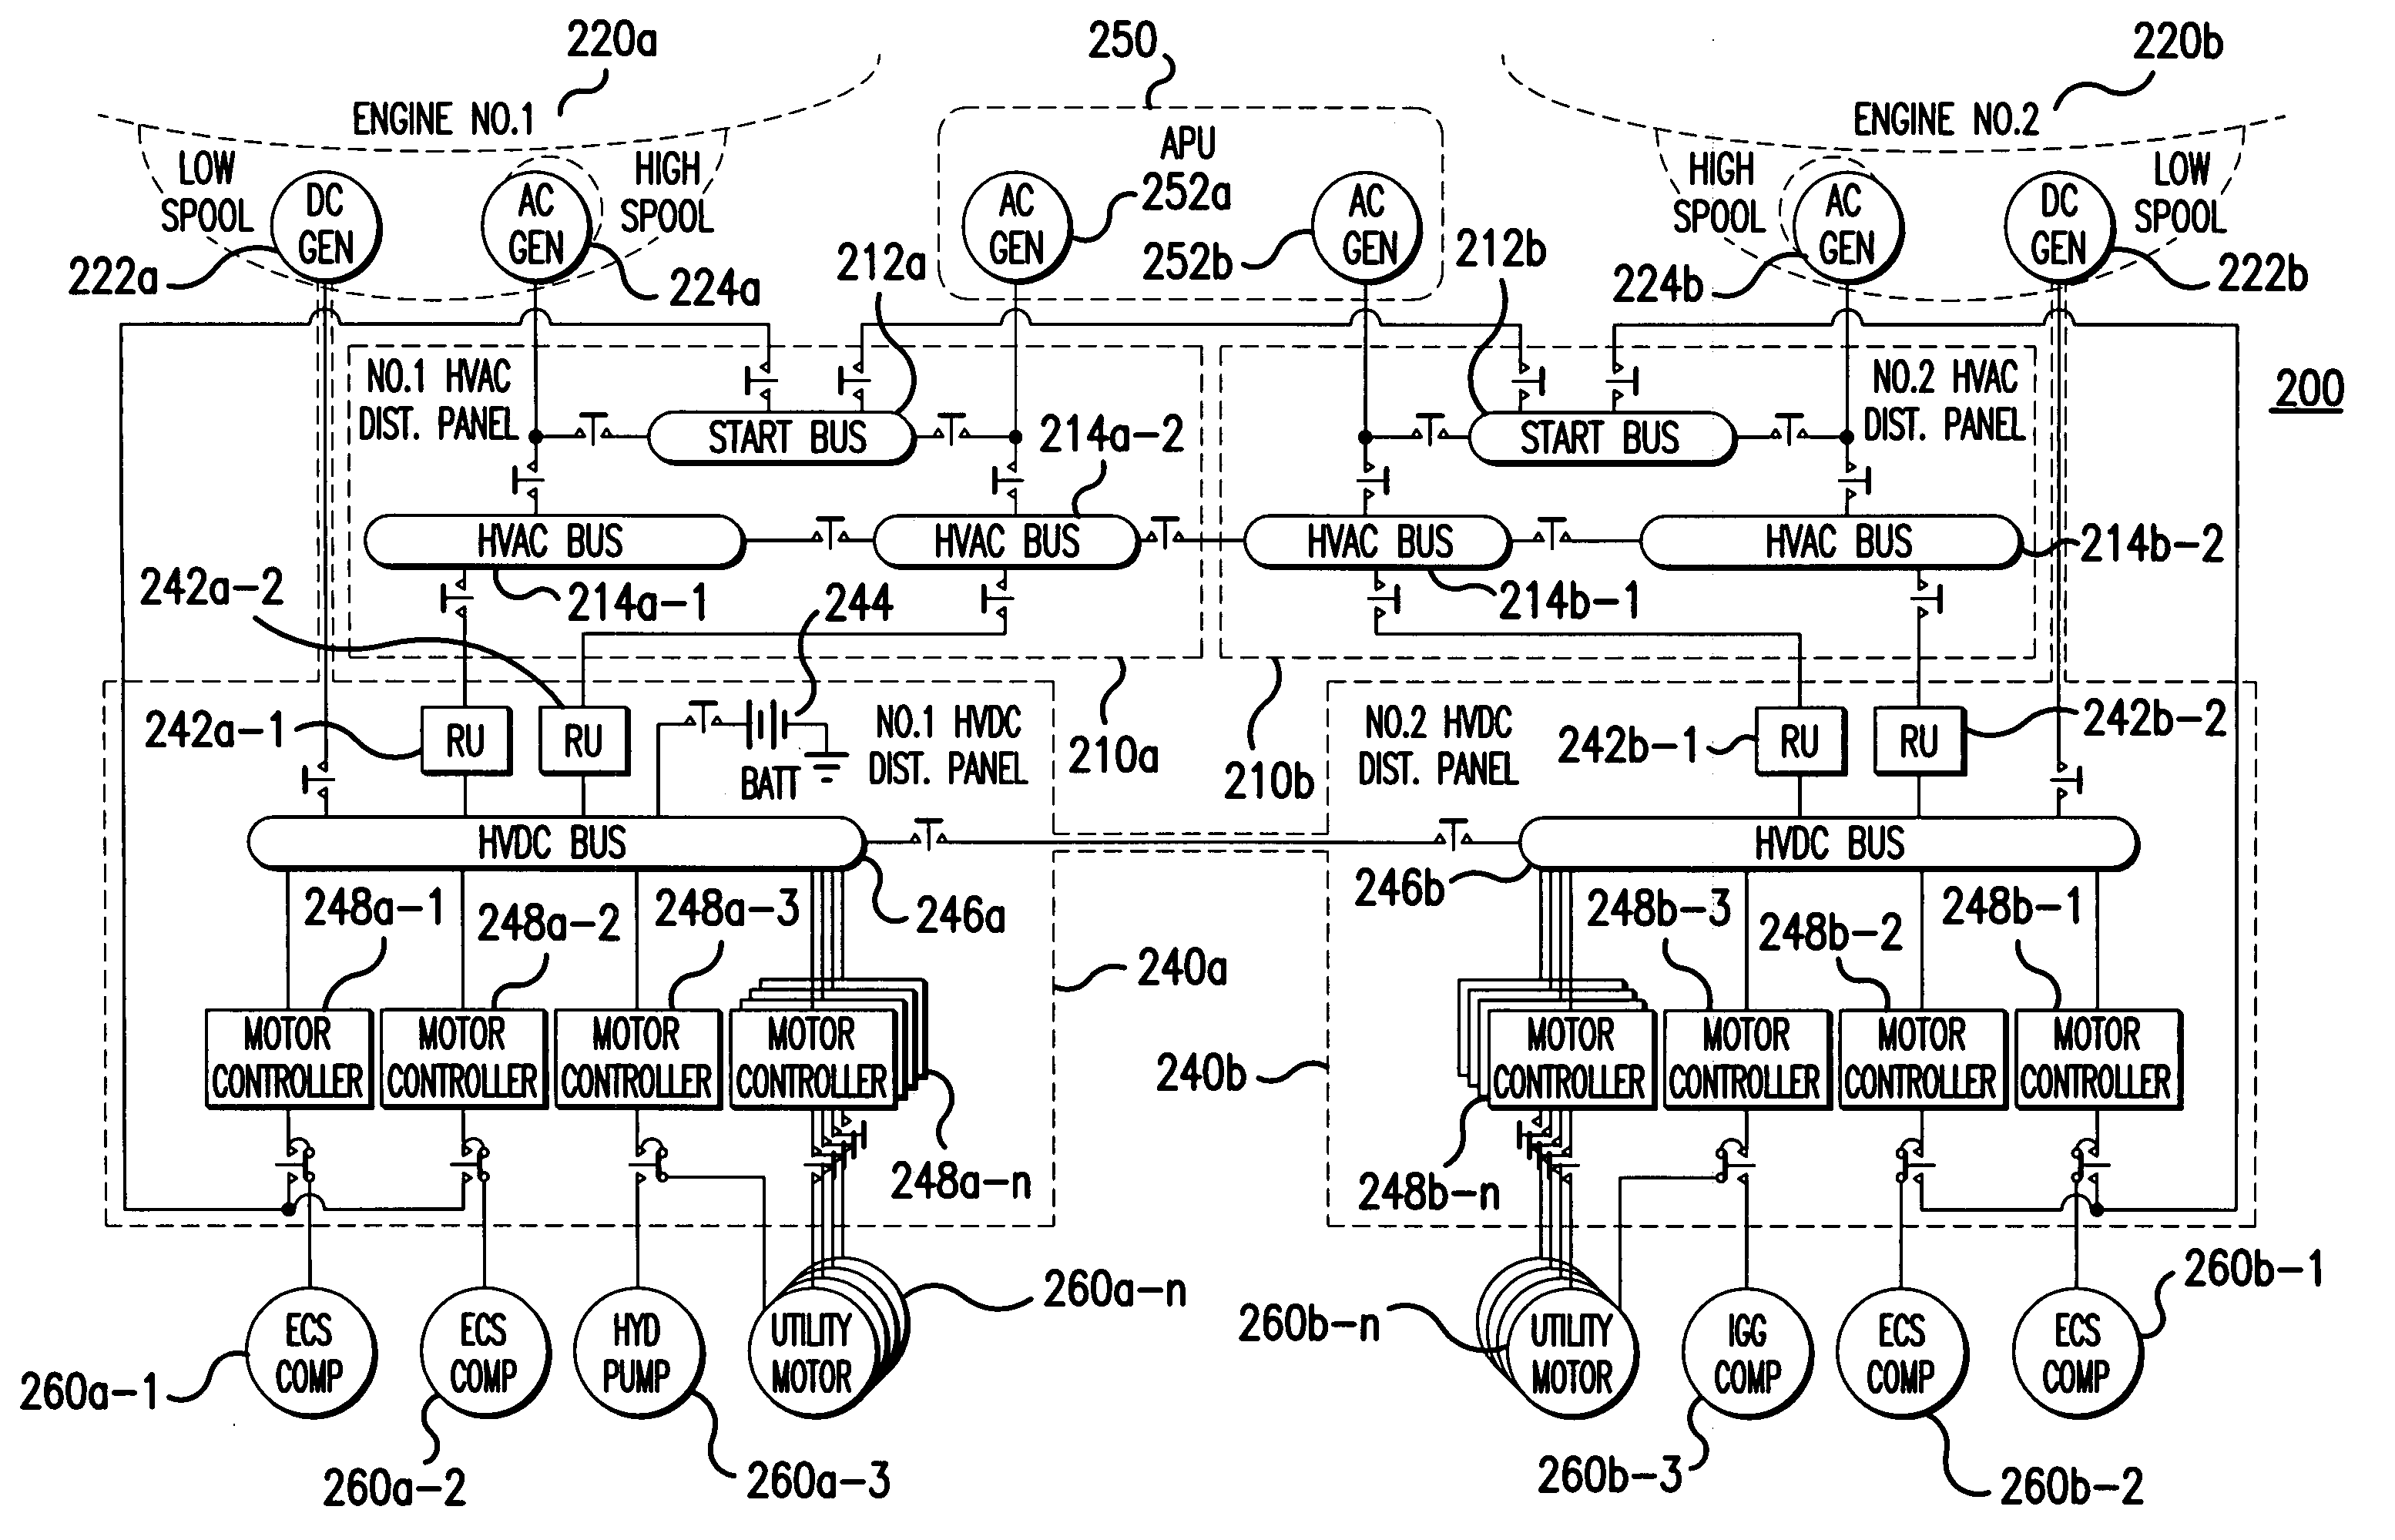 Electrical starting, generation, conversion and distribution system architecture for a more electric vehicle